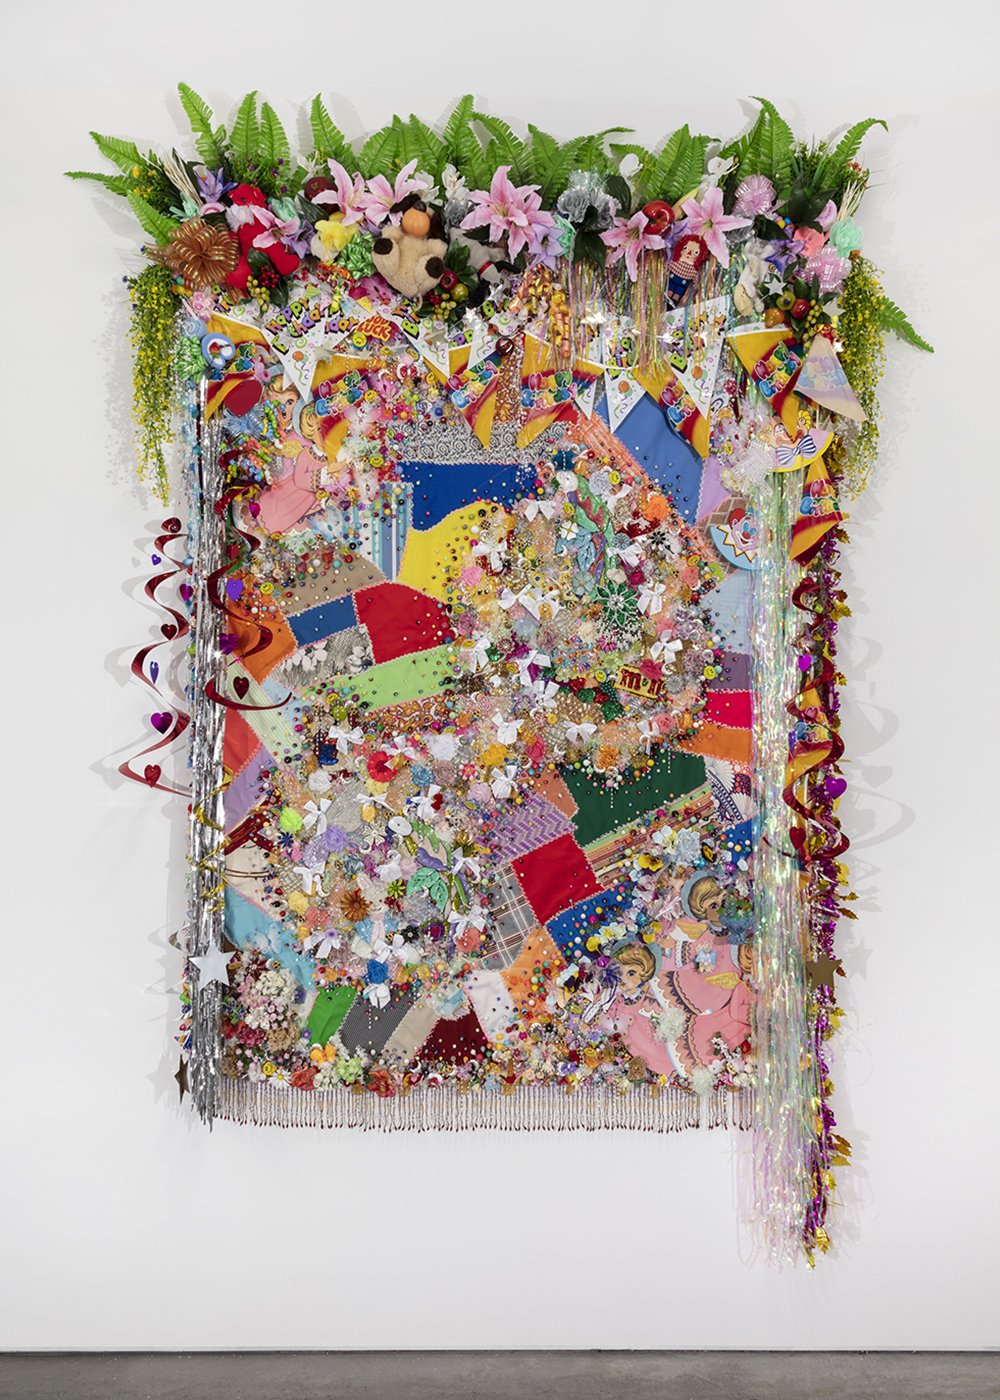   Shroud #2,  2022, Found ‘Crazy’ quilt ca. 1950, trim, fabric flowers, streamers, banners, garland, paper cut-outs, toys, ribbon, costume jewelry, buttons, plastic flowers, fauna, and fruit, beads, sequins, thread, fabric, Douglas fir, 110 x 82 x 10